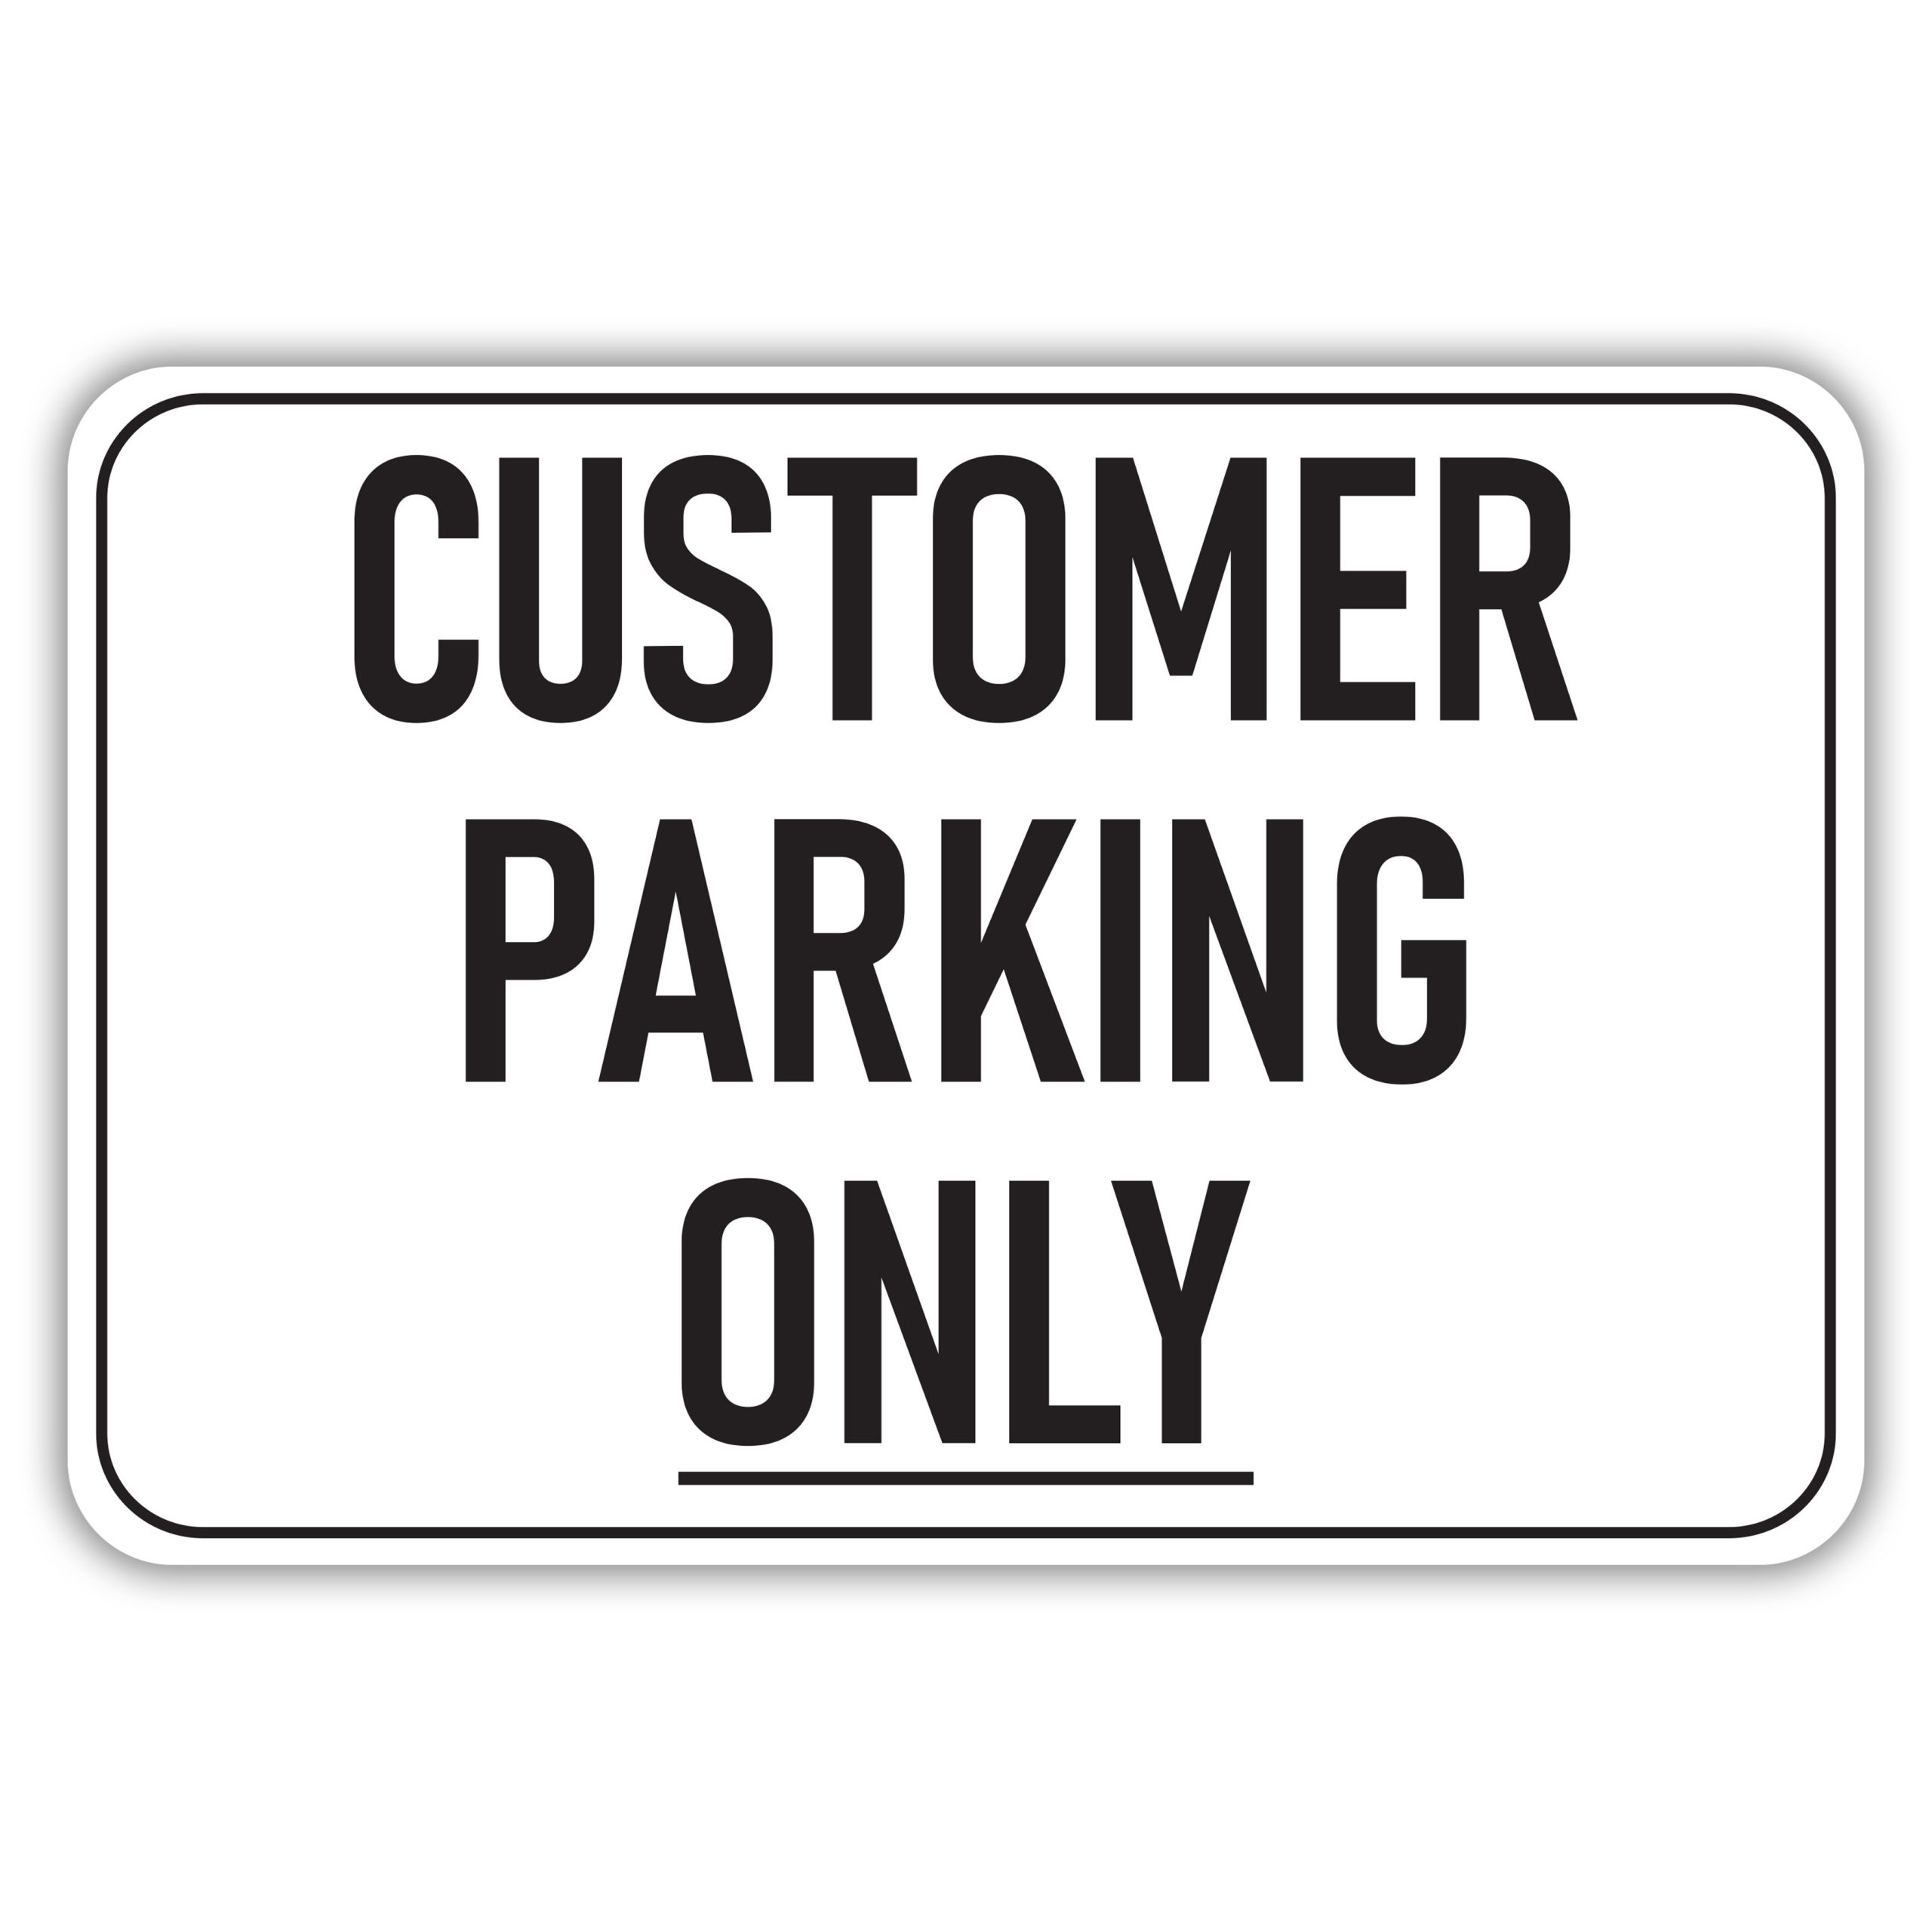 CUSTOMER PARKING ONLY American Sign Company